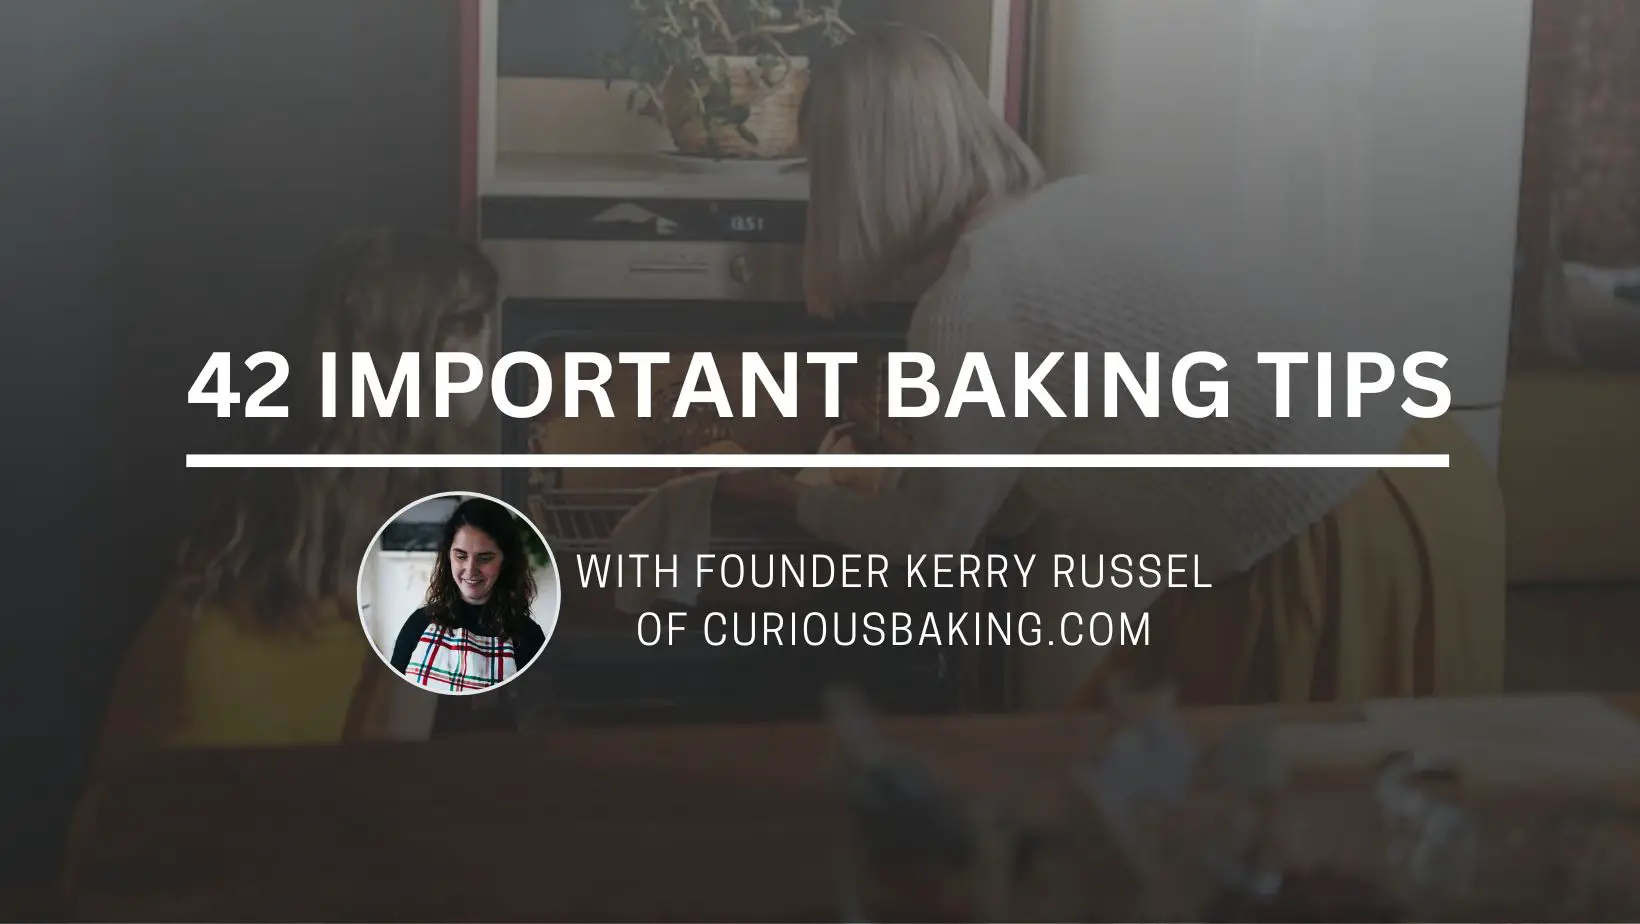 42 Important Baking Tips by CuriousBaking.com